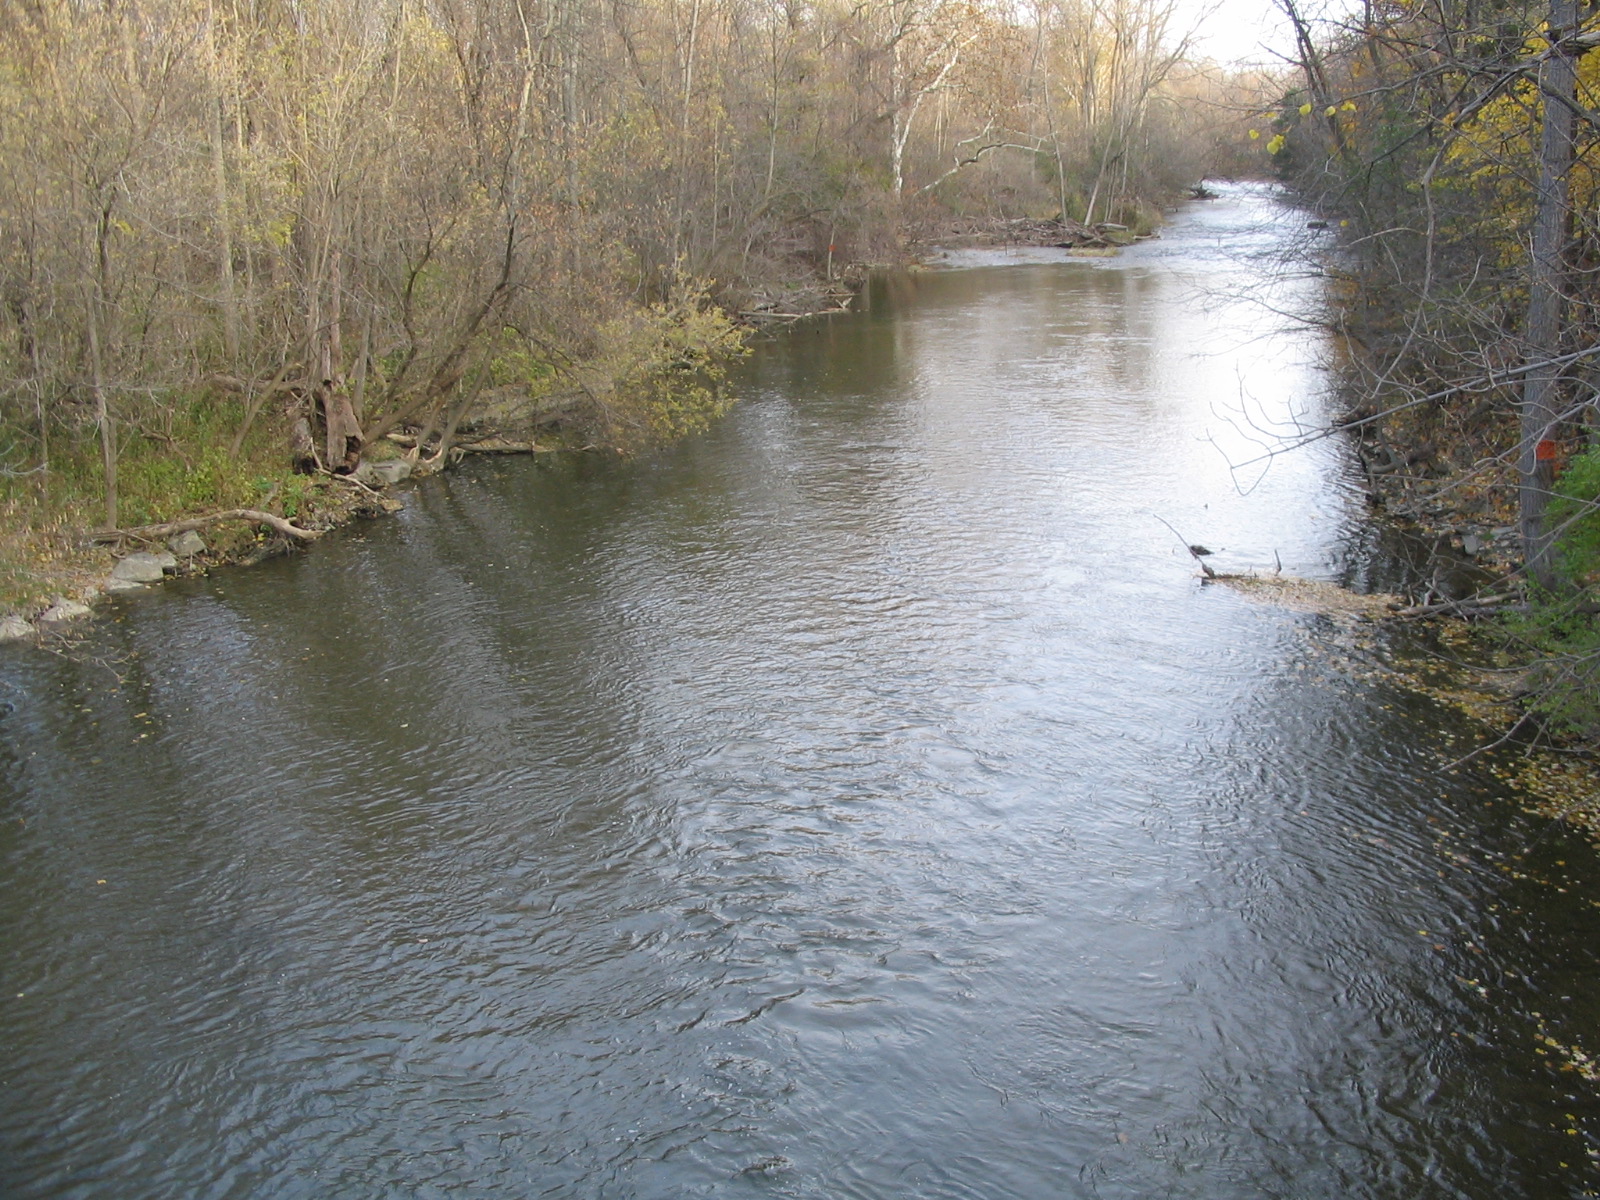 Photograph of the Oatka Creek at Garbutt, NY (GRBN6) looking upstream